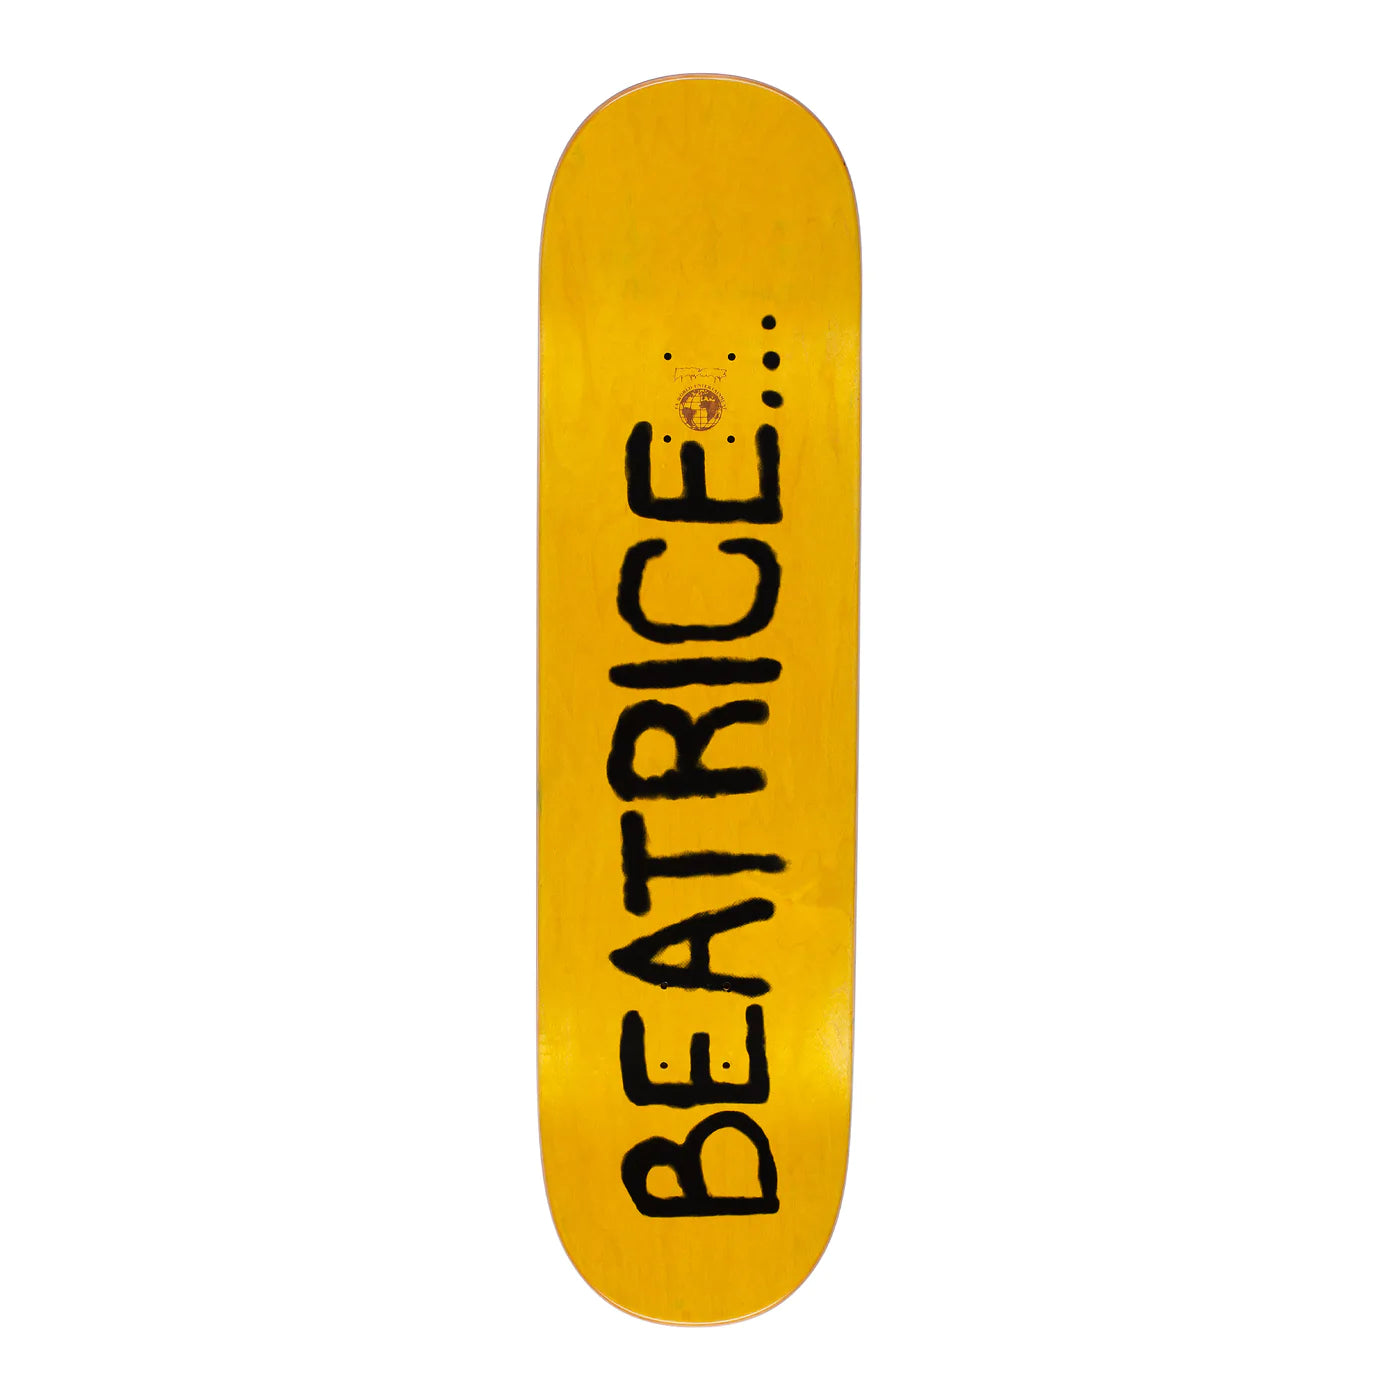 Fucking Awesome Beatrice Class Photo Skateboard Deck 8.5